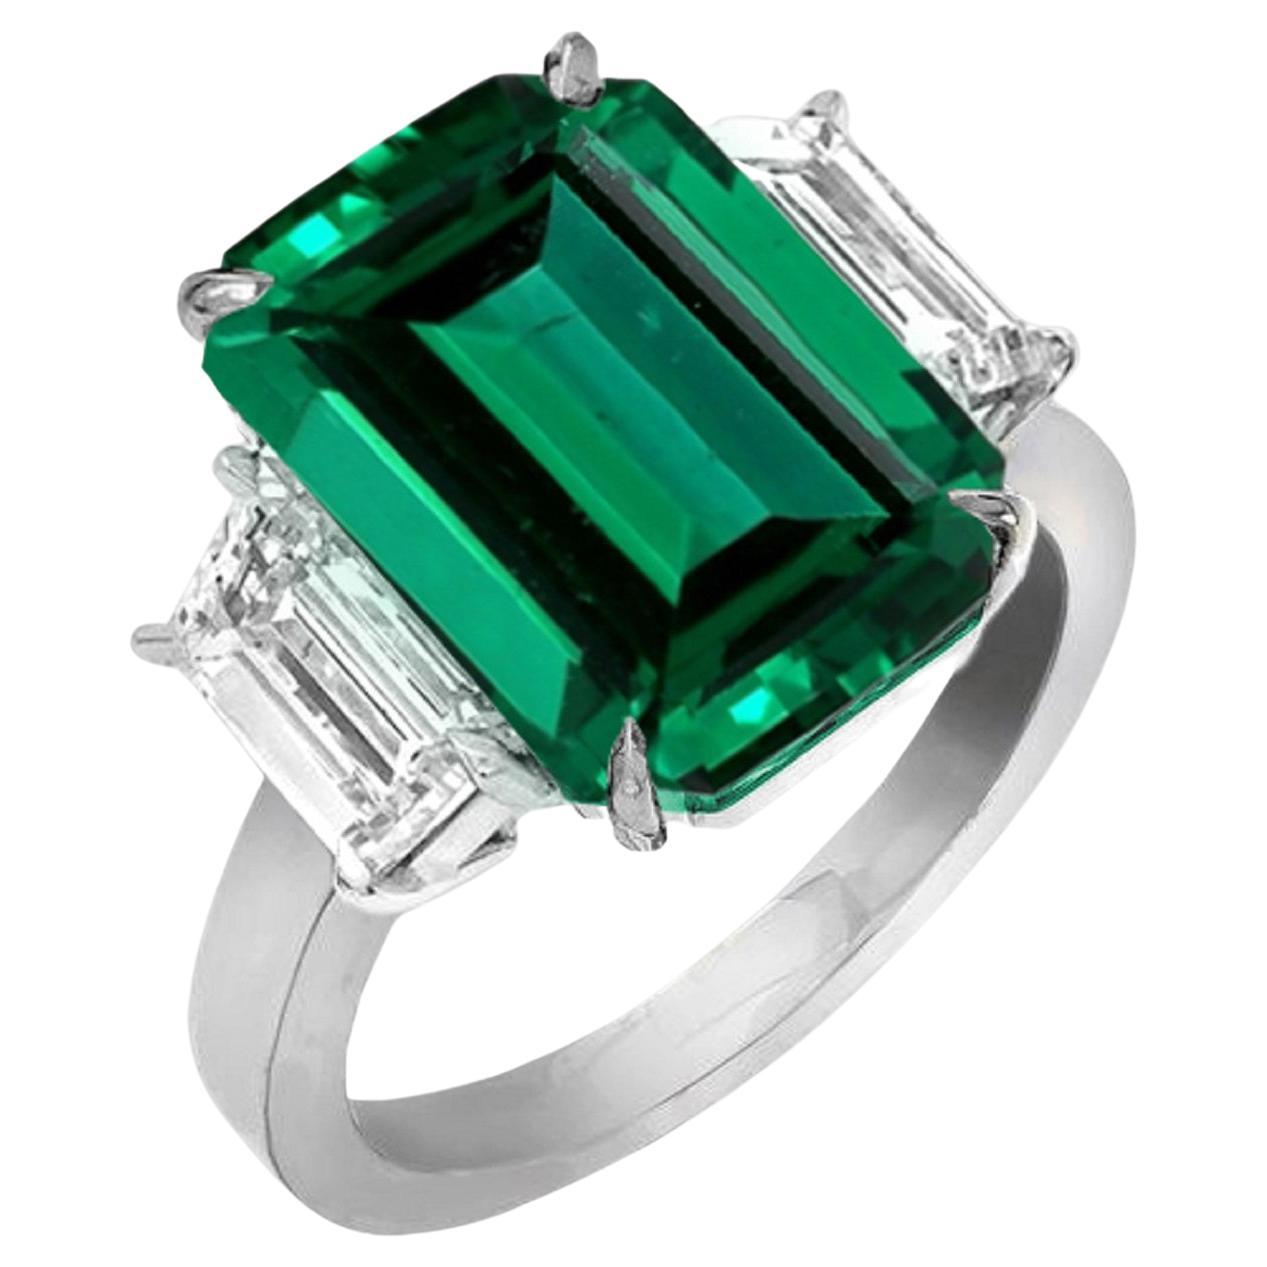 - 7.74ct size natural emerald

- GIA certified

- Gorgeous rich green color! Will appear richer once mounted as well!

- Beautiful emerald cut